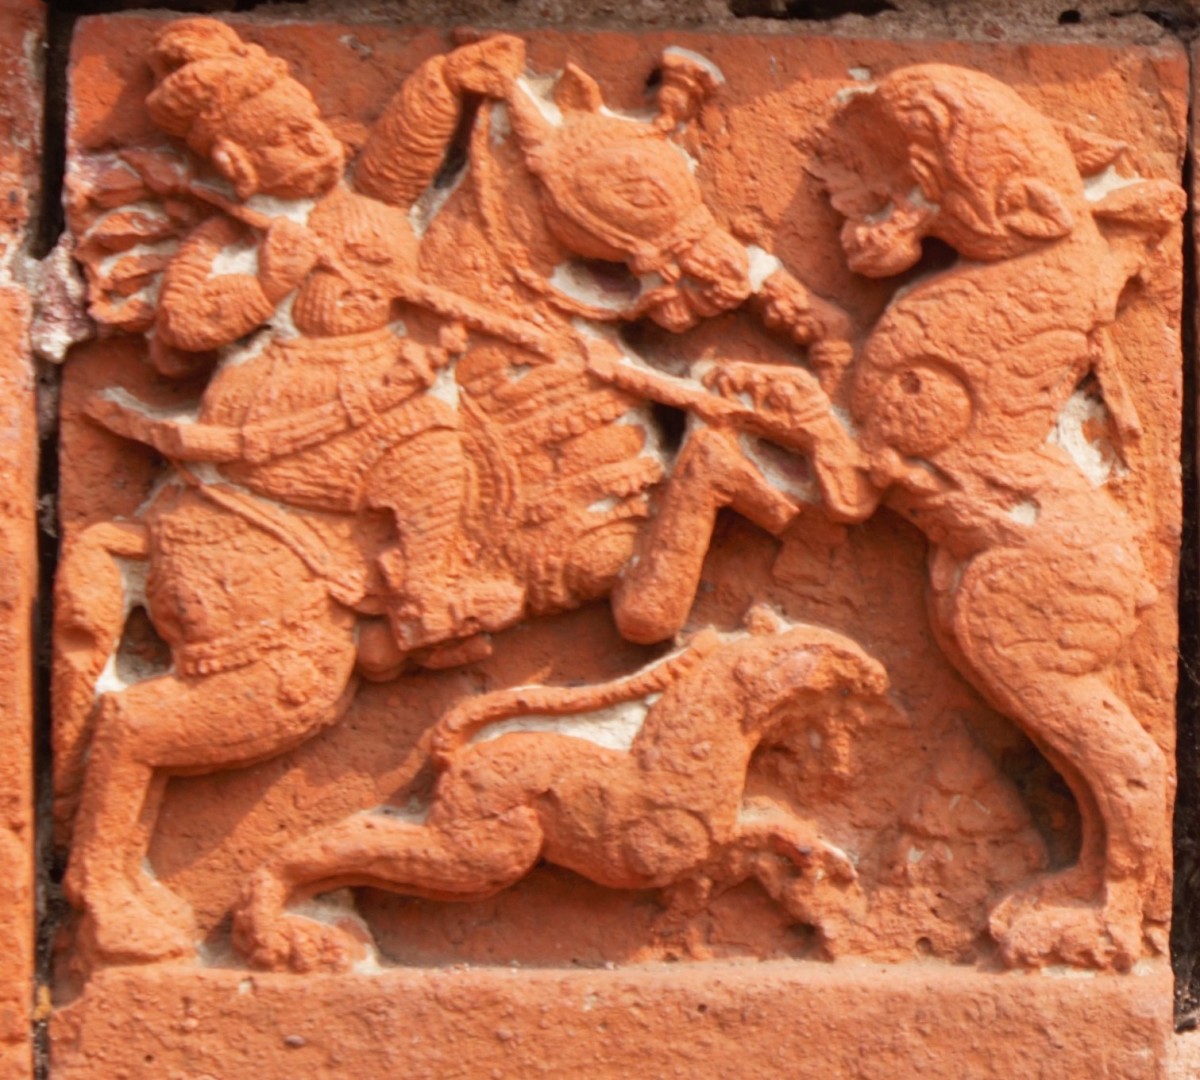 Hunter with a cheetah (possibly); terracotta; Ramchandra temple; Guptipara, Hooghly